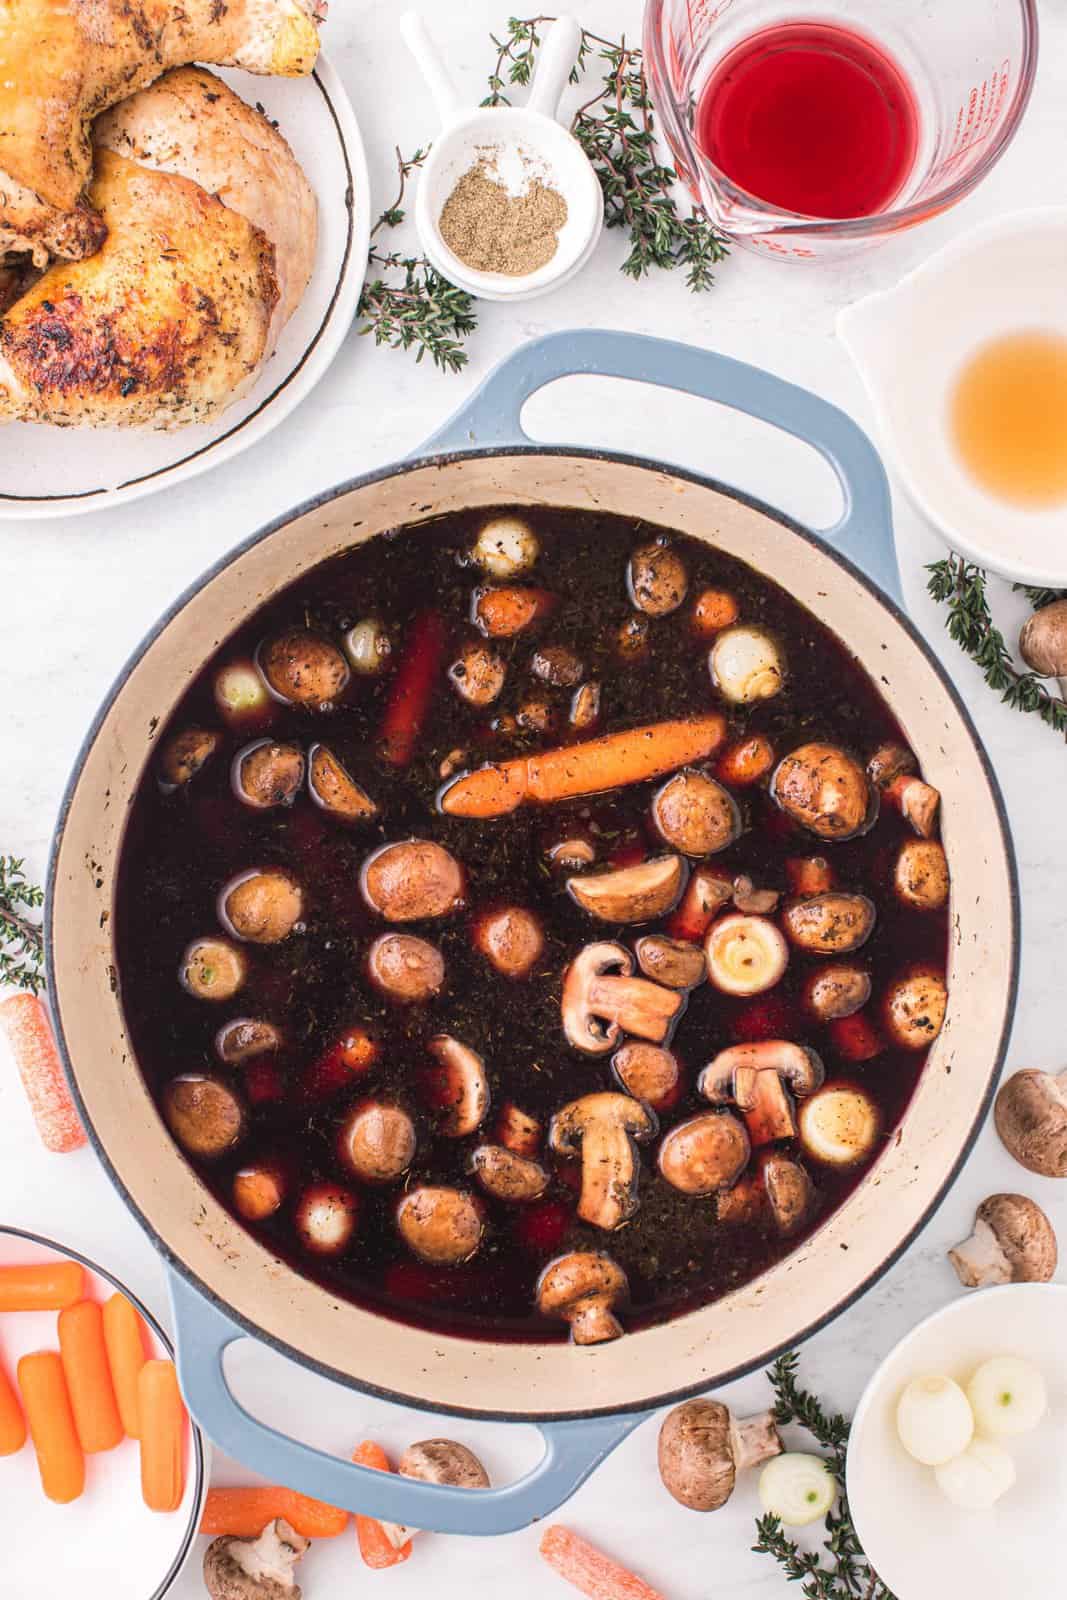 A red wine broth with herbs, spices, carrots, pearl onions, and mushrooms.